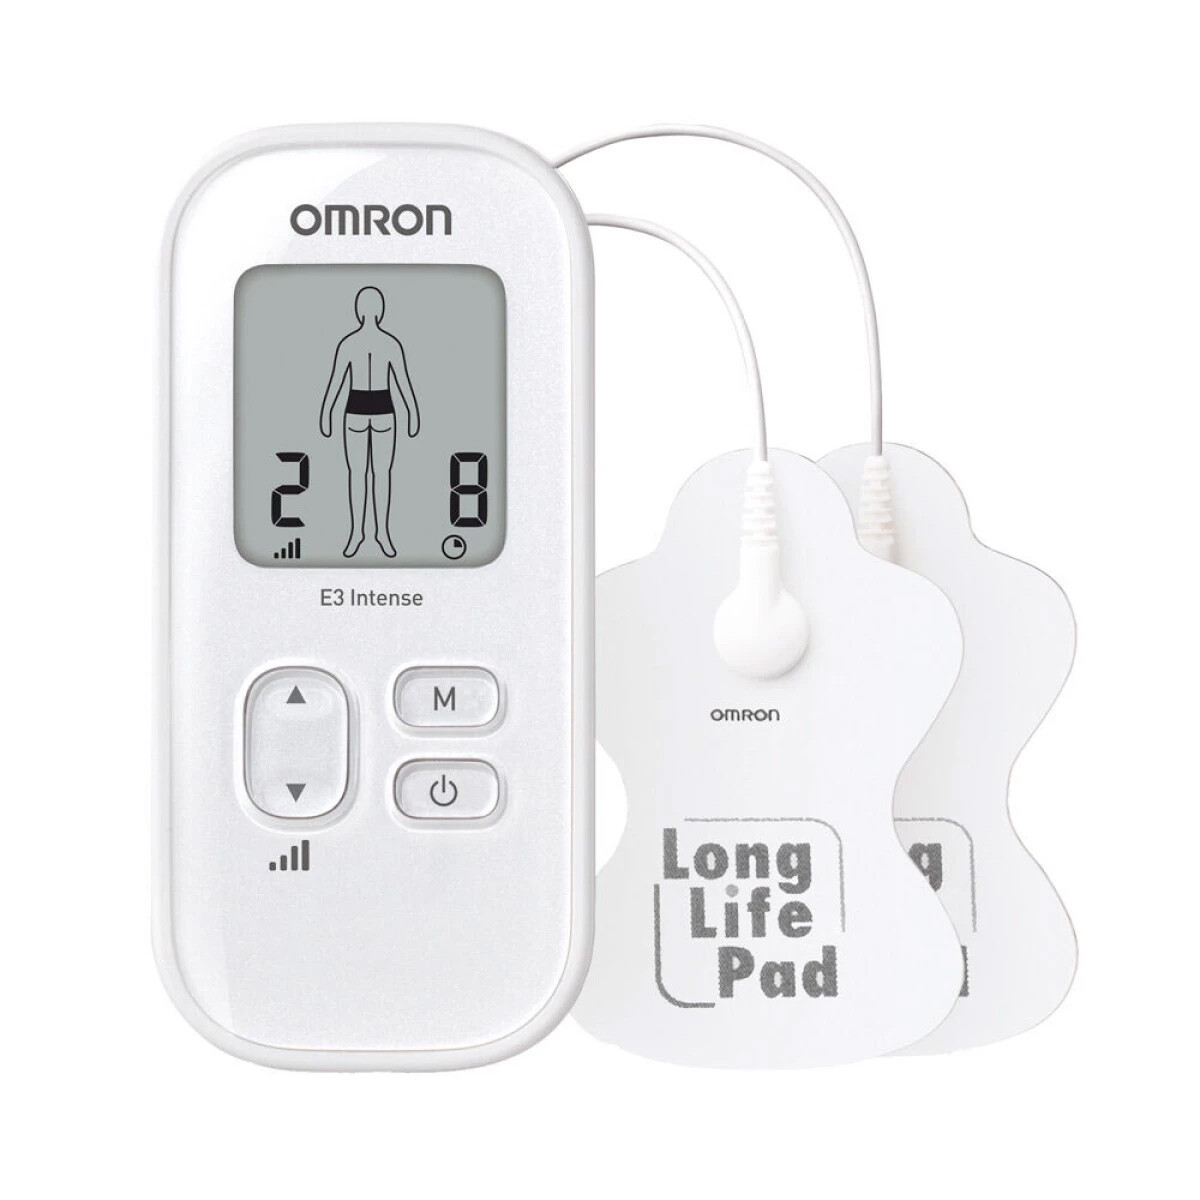 OMRON Total Power + Heat TENS Unit, Customized Control